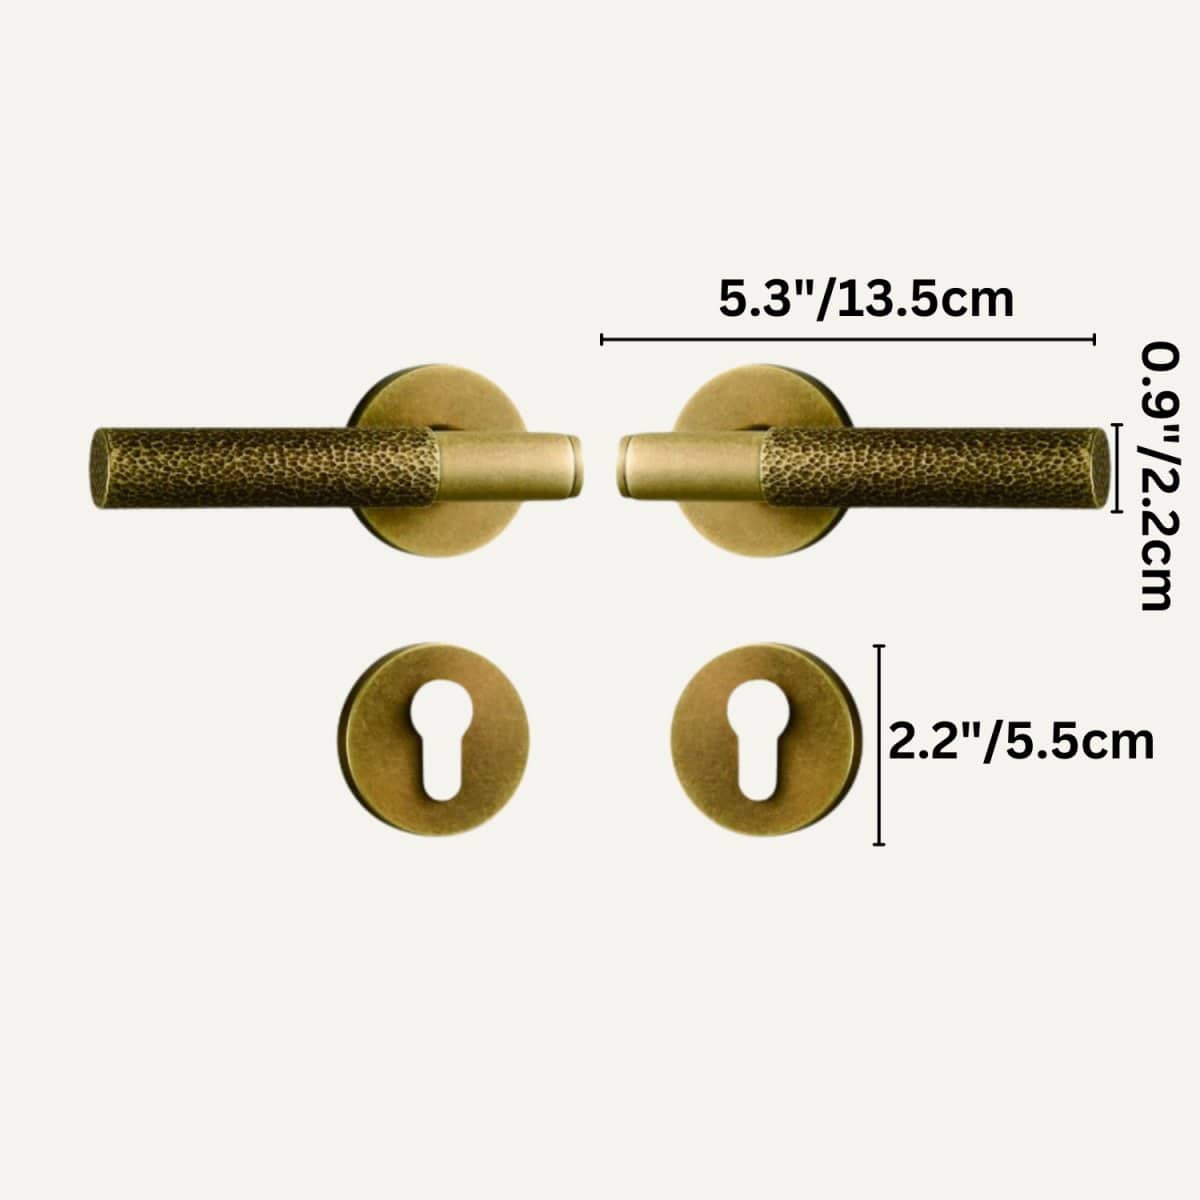 Residence Supply 2.2" x 5.3" / 5.5 x 13.5cm / With Escutcheon Plates / Antique Brass Asper Handle and Lock